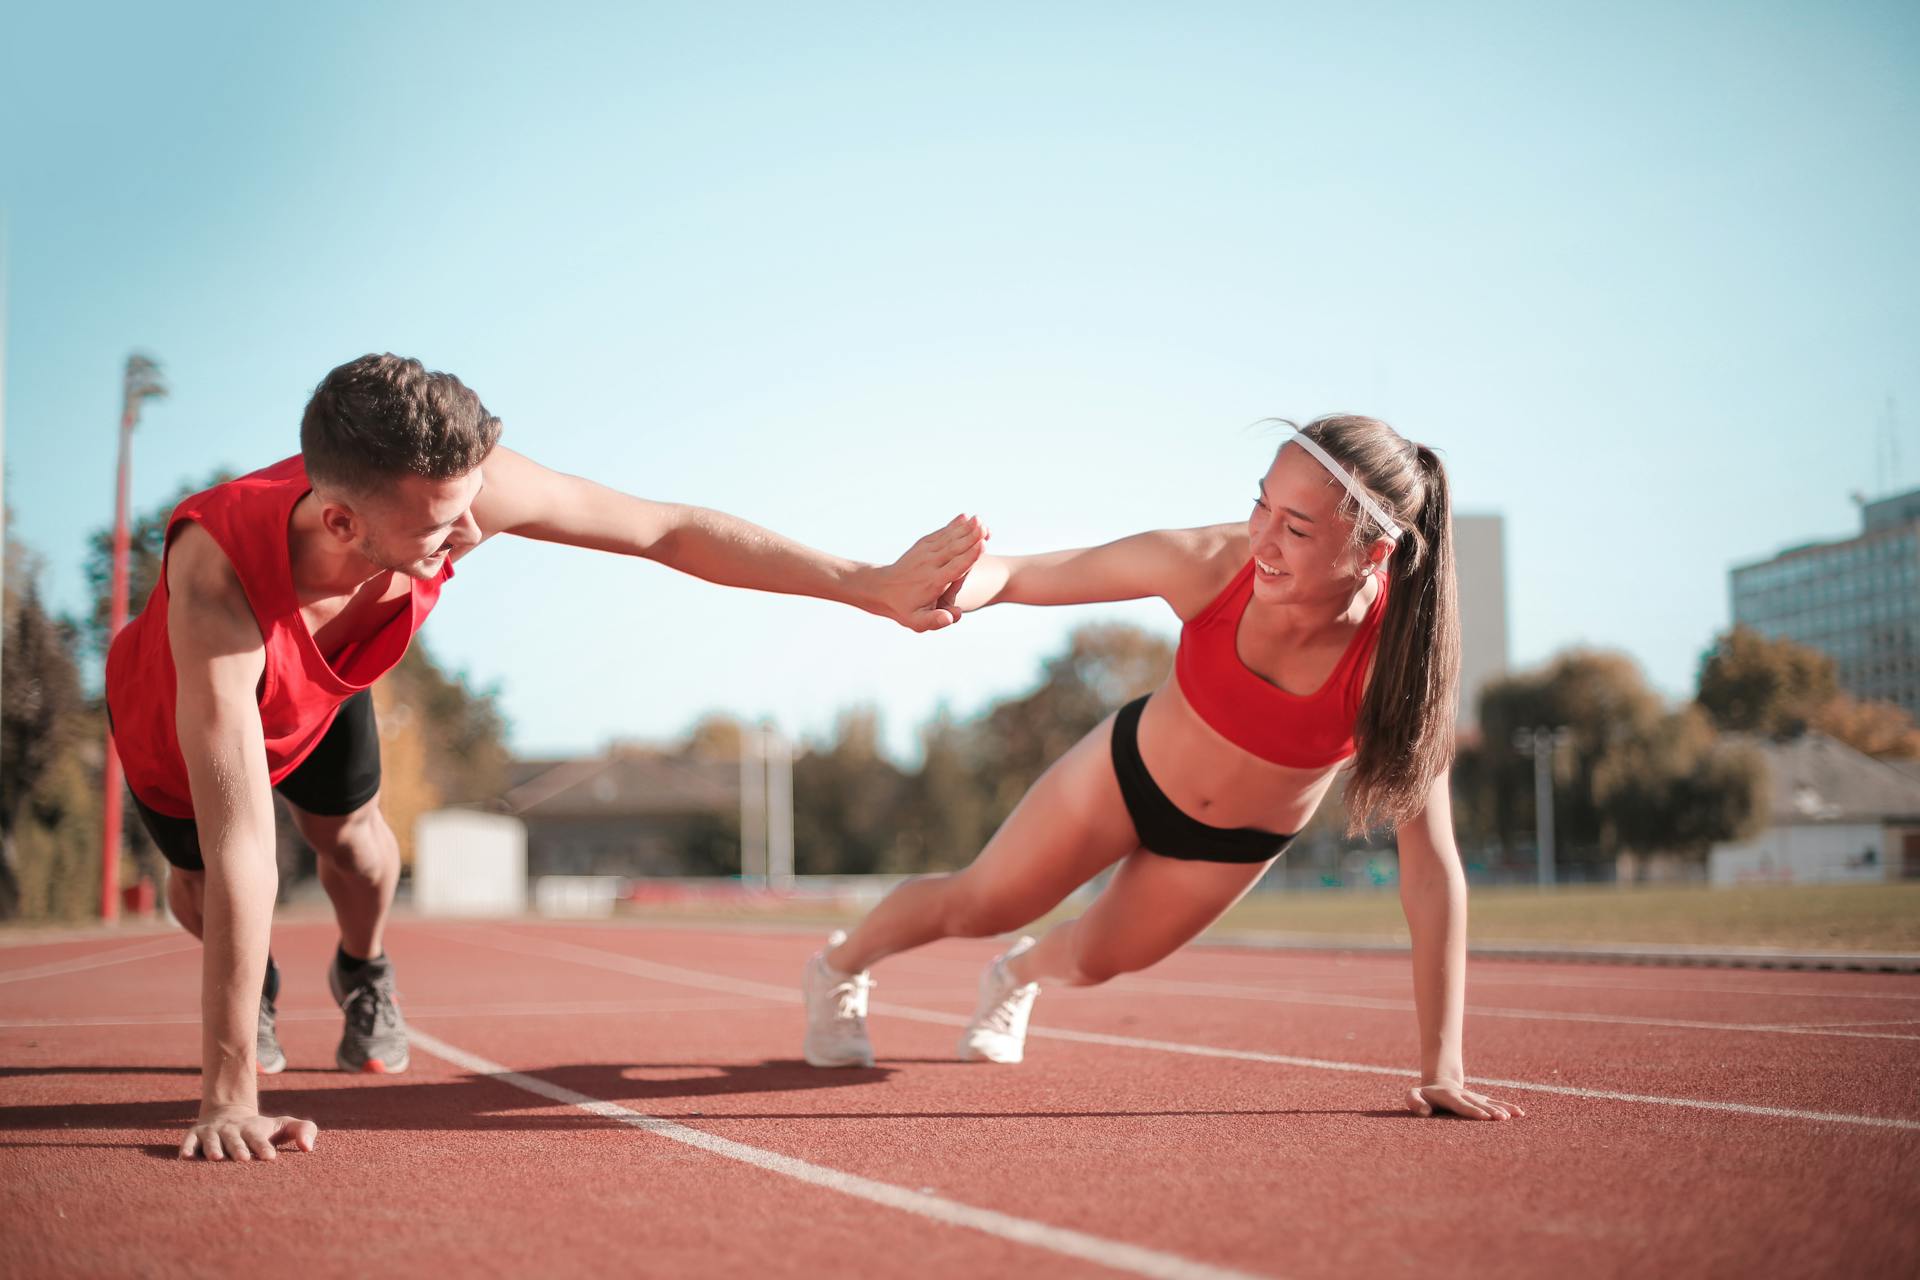 Man and woman in red and black running outfits high-five while holding a plank pose.